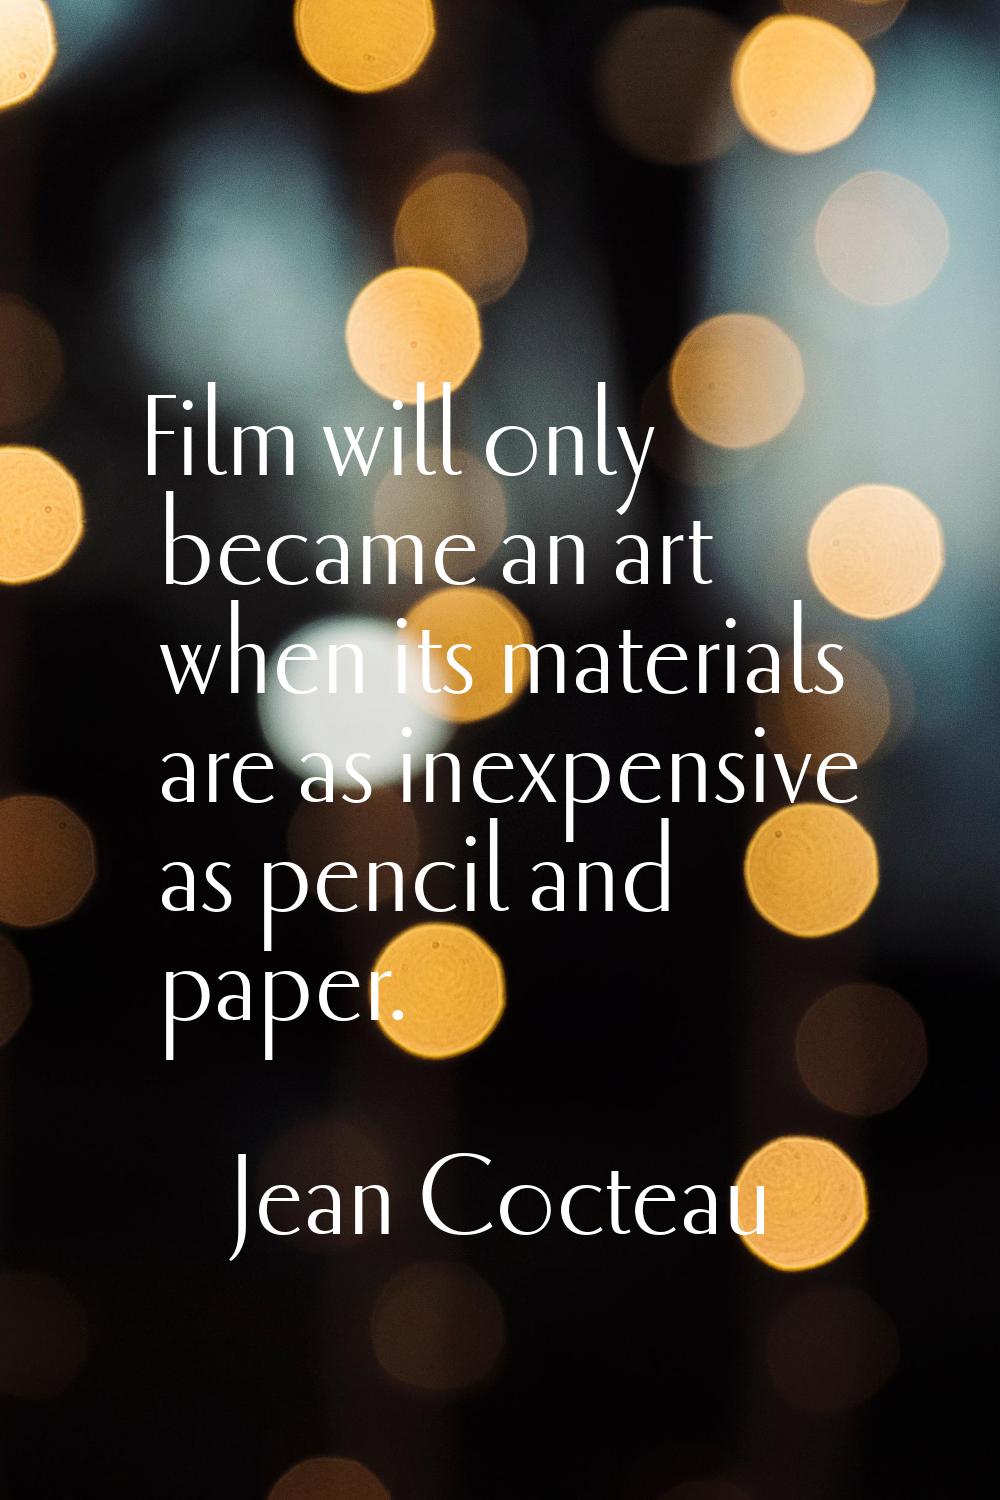 Film will only became an art when its materials are as inexpensive as pencil and paper.